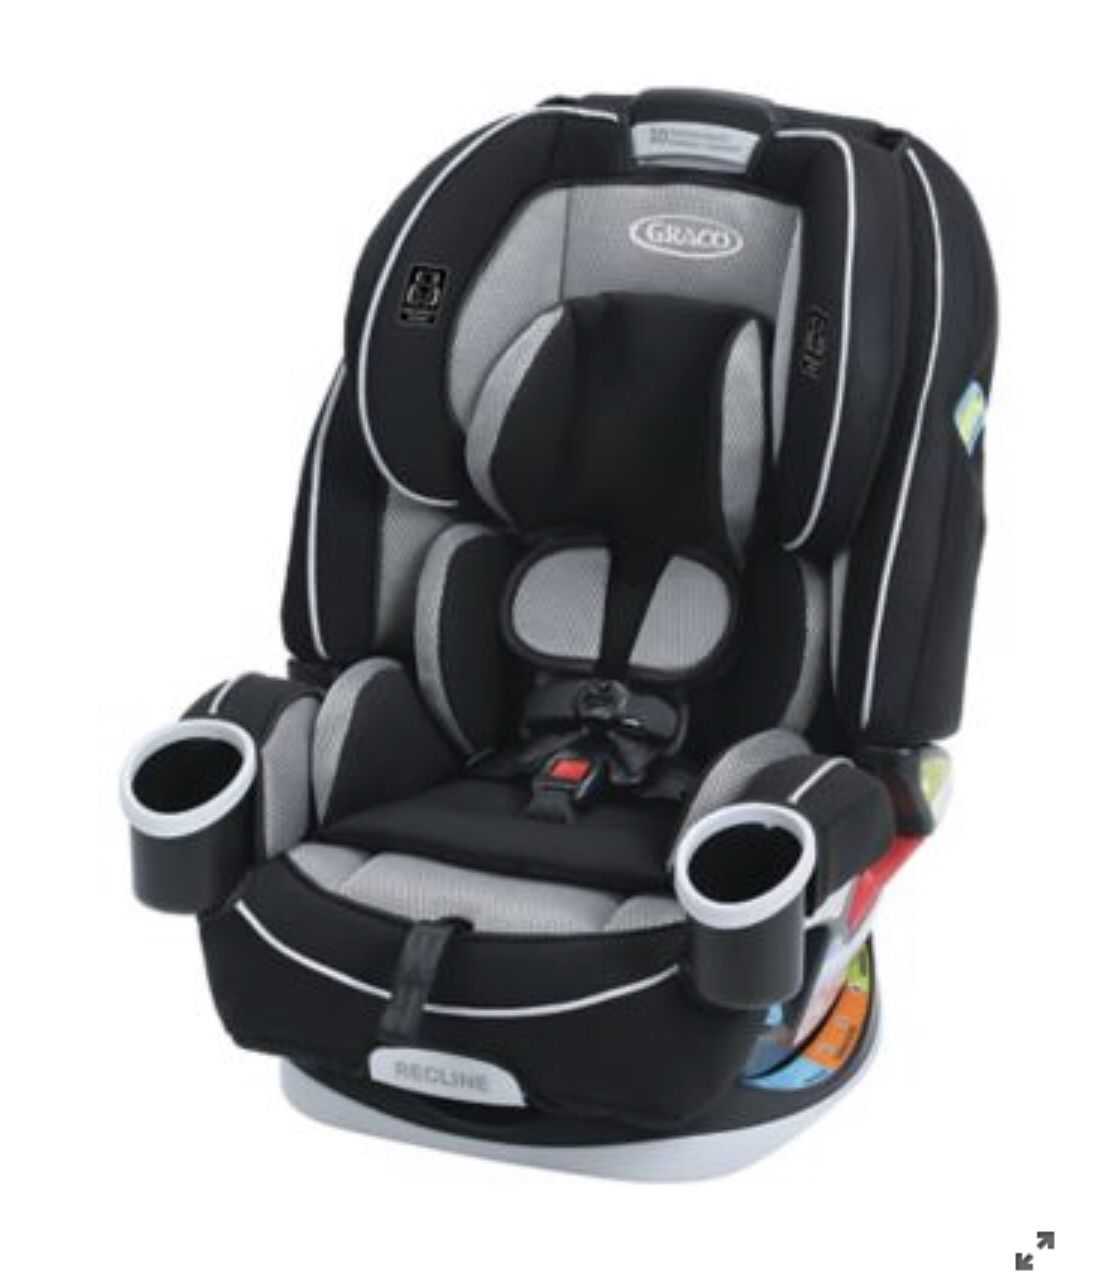 Graco 4ever 4-in-1 convertible car seat